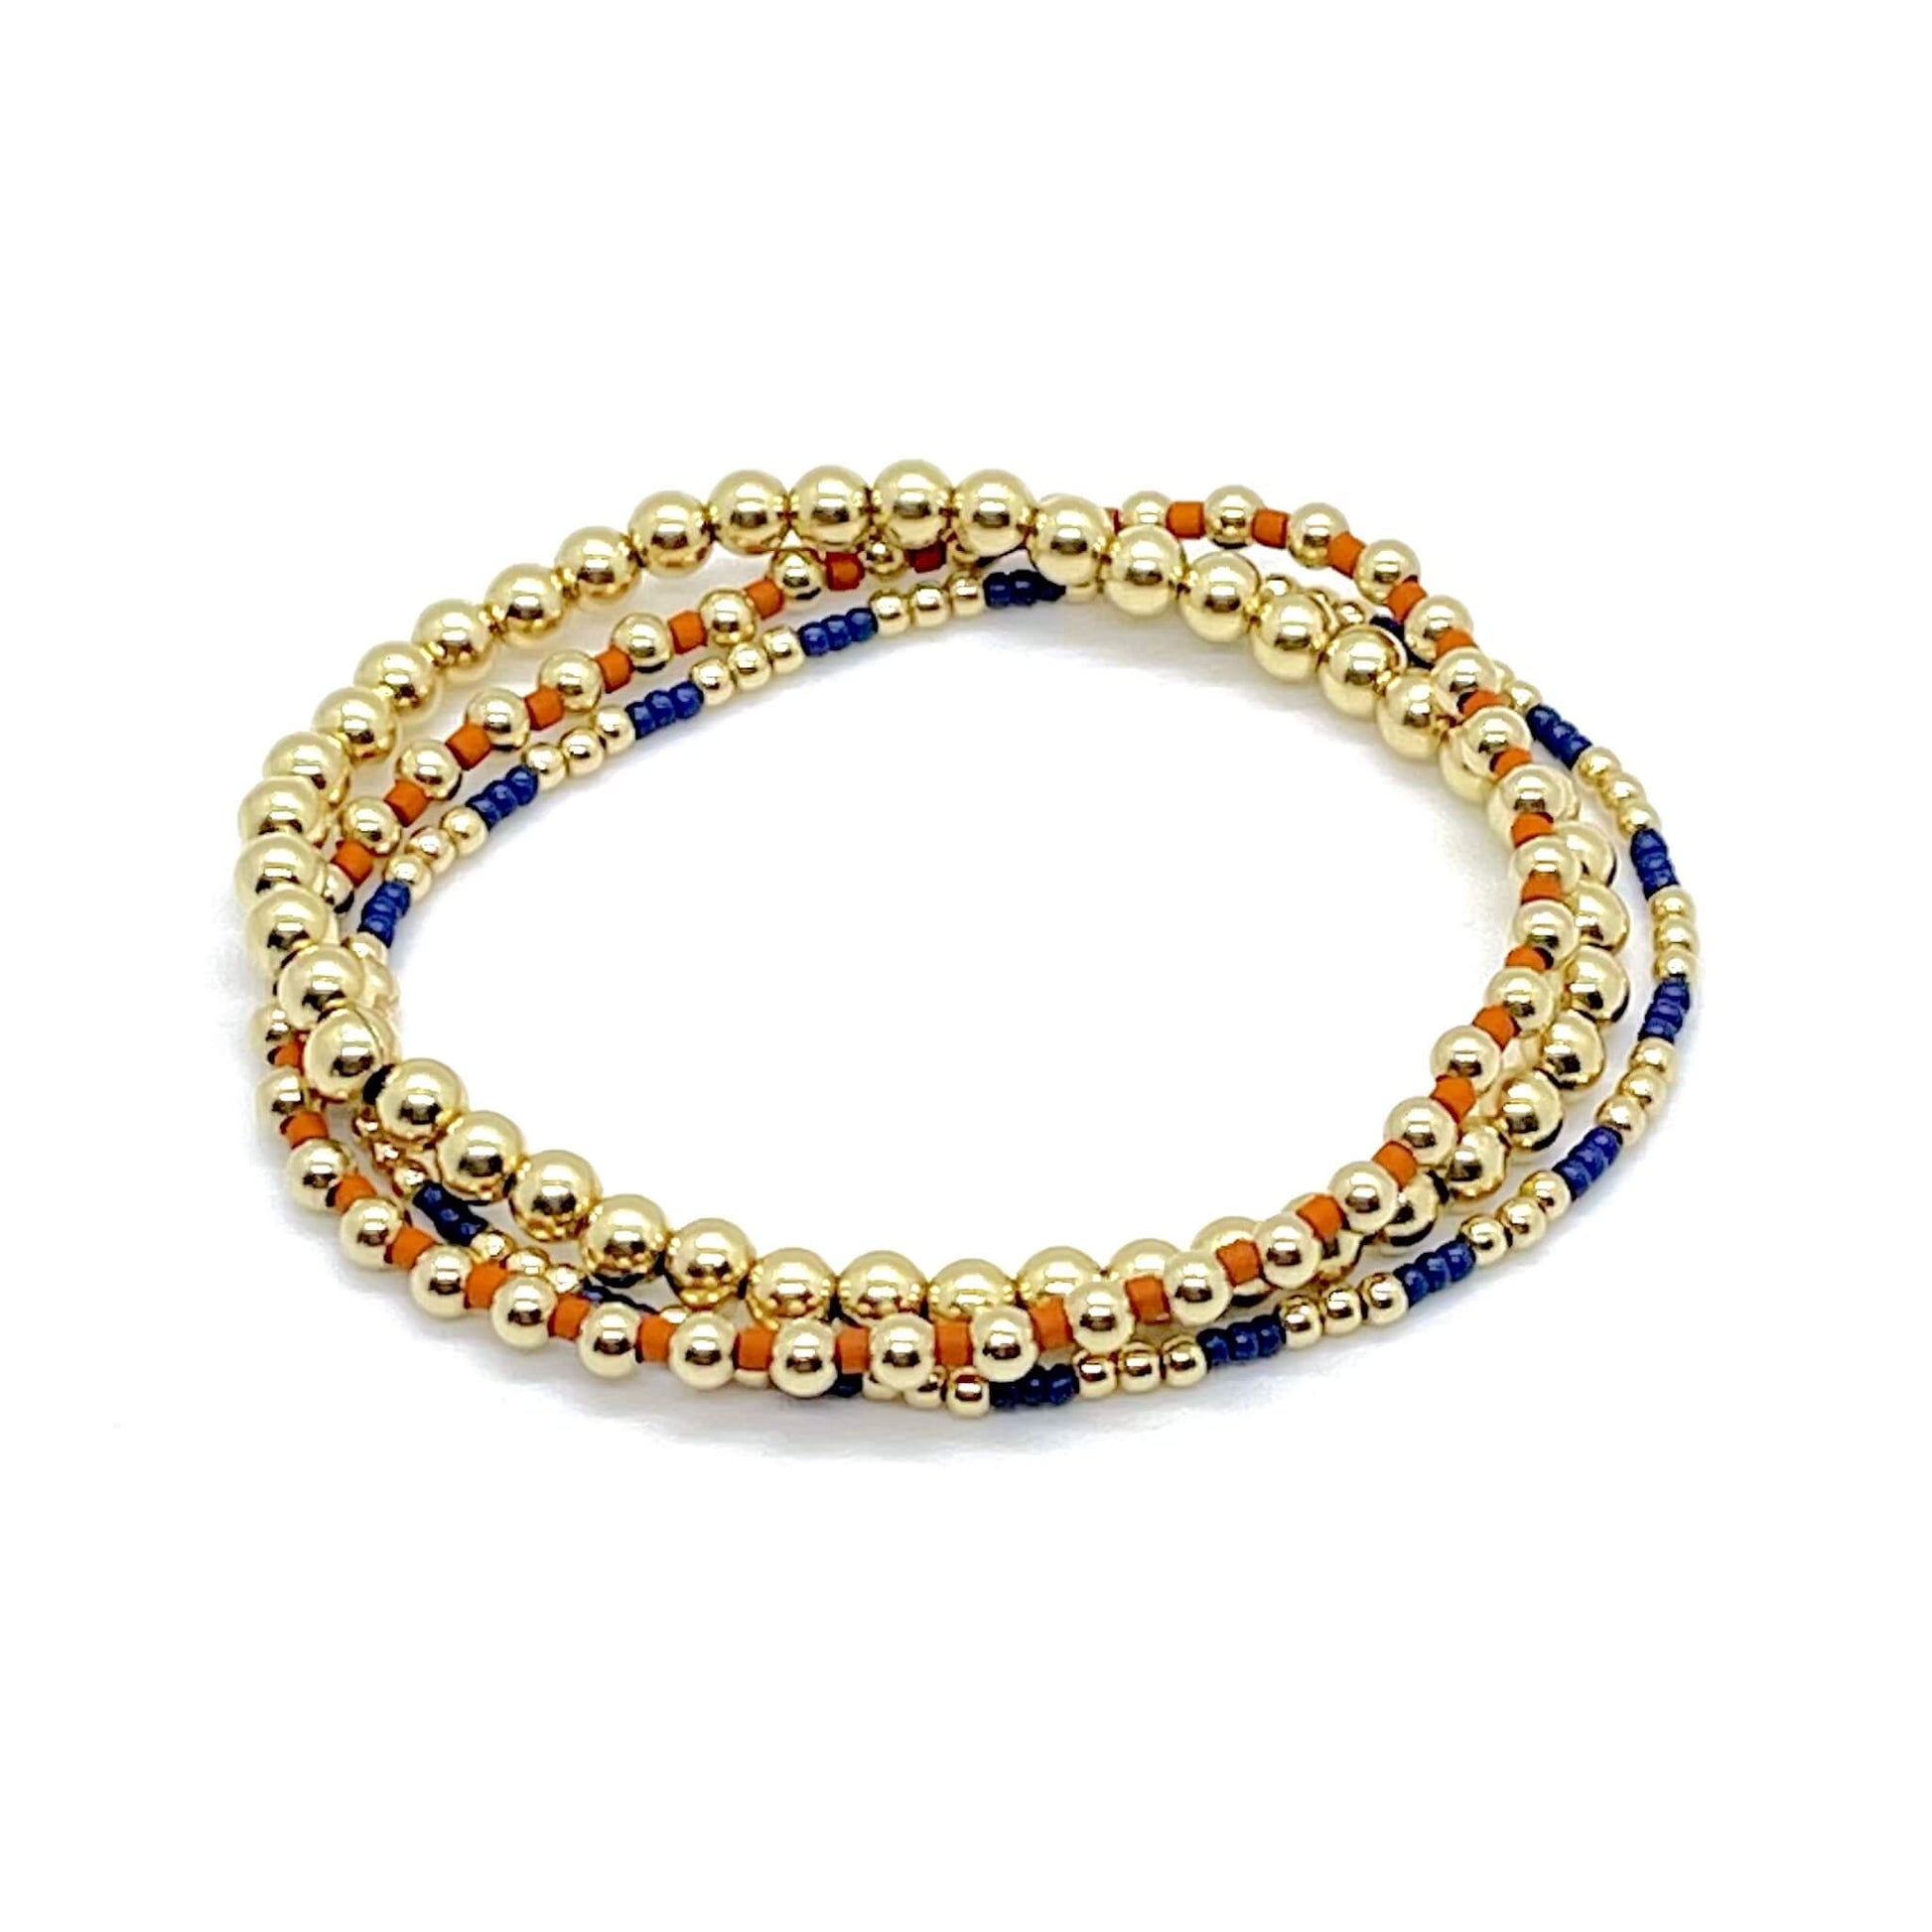 Gold ball bracelets with orange and navy blue seed beads on elastic stretch cord.